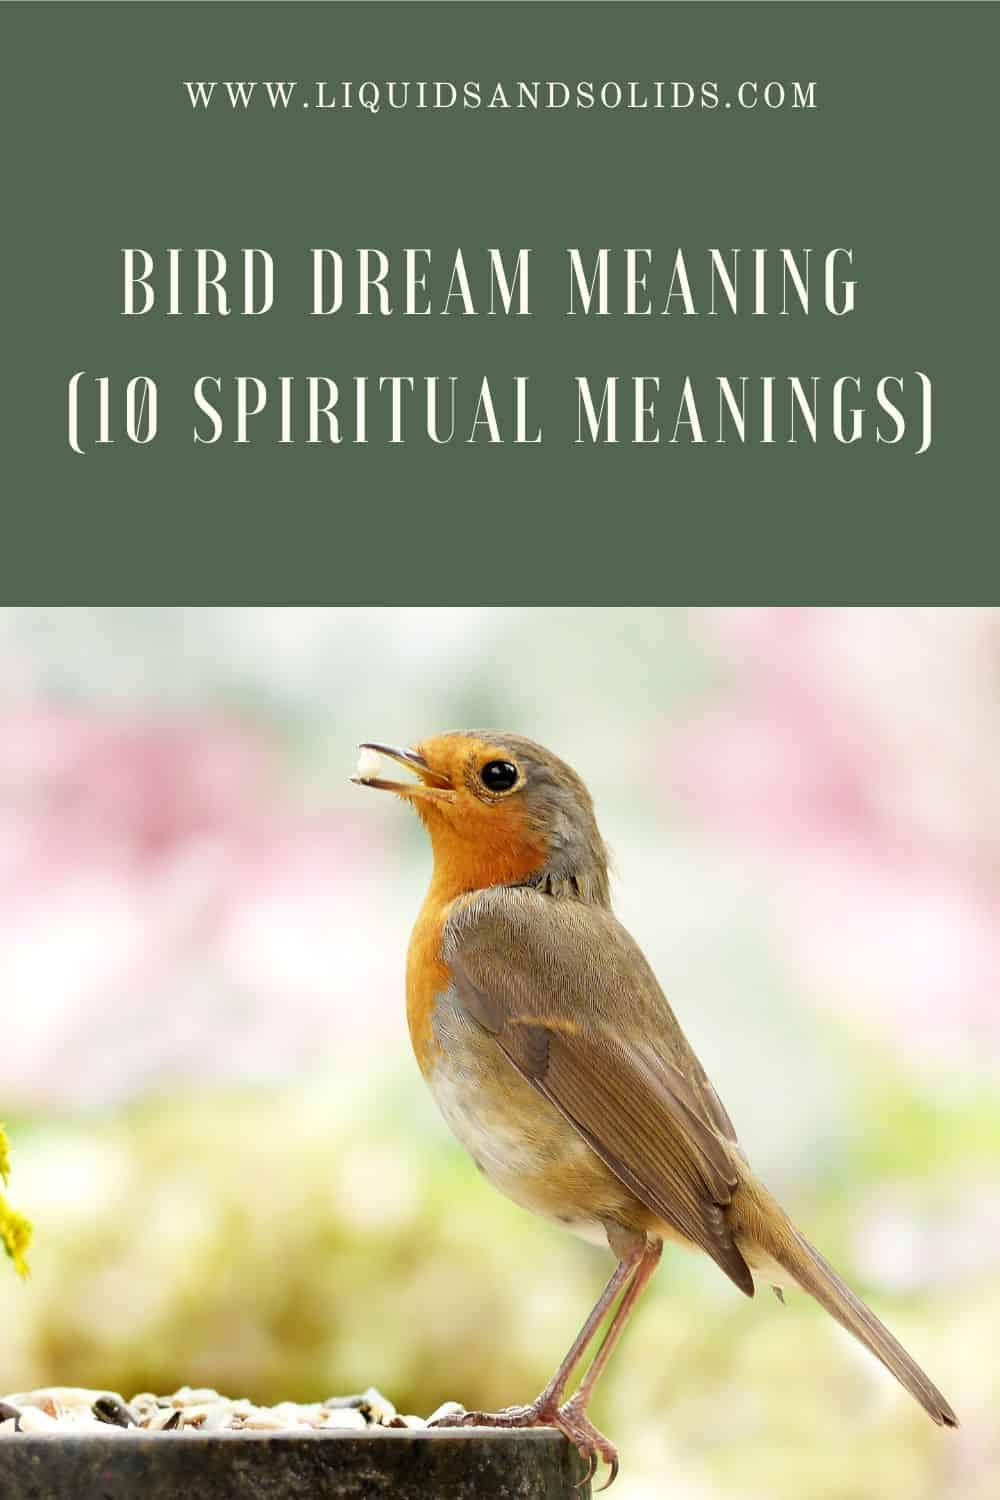 What Does it Mean When You Dream About Birds?